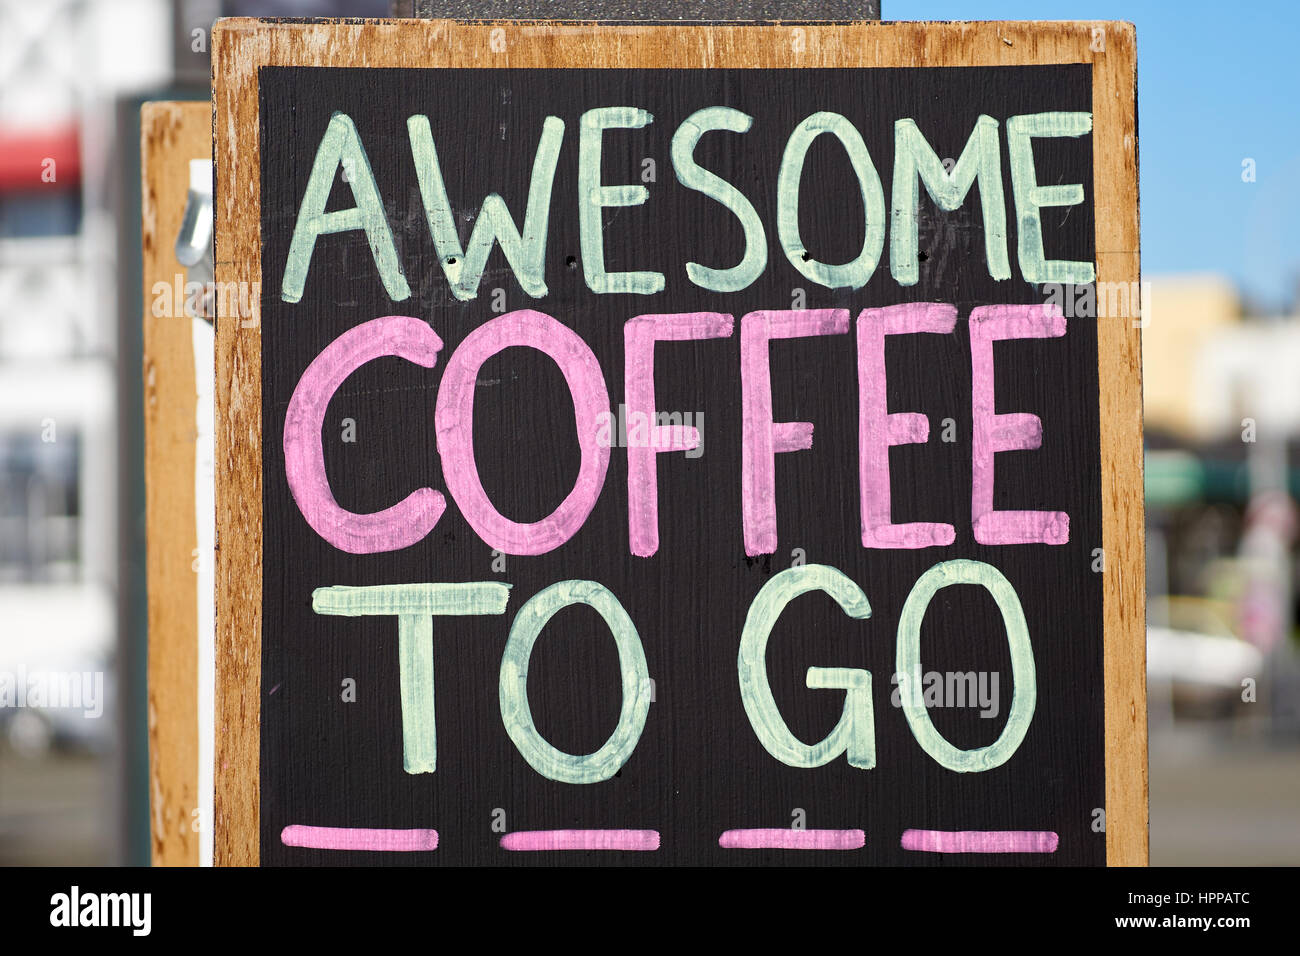 Awesome coffee to go sign - outdoor advertising with handwriting on a black chalkboard Stock Photo